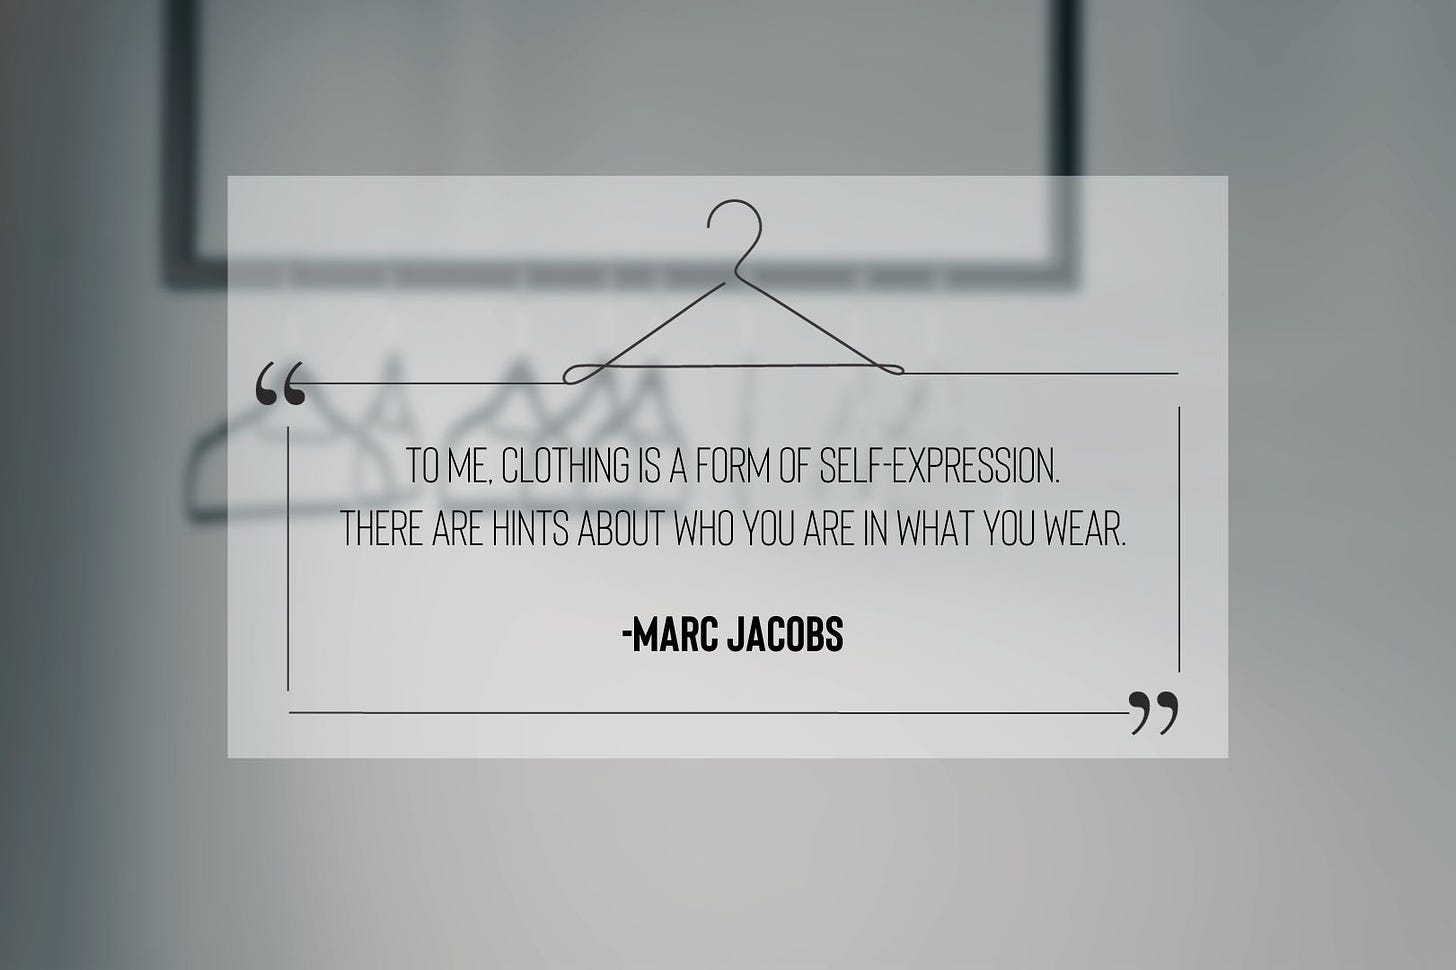 Marc Jacob's quote: To me, clothing is a form of self-expression. There are hints about who you are in what you wear.